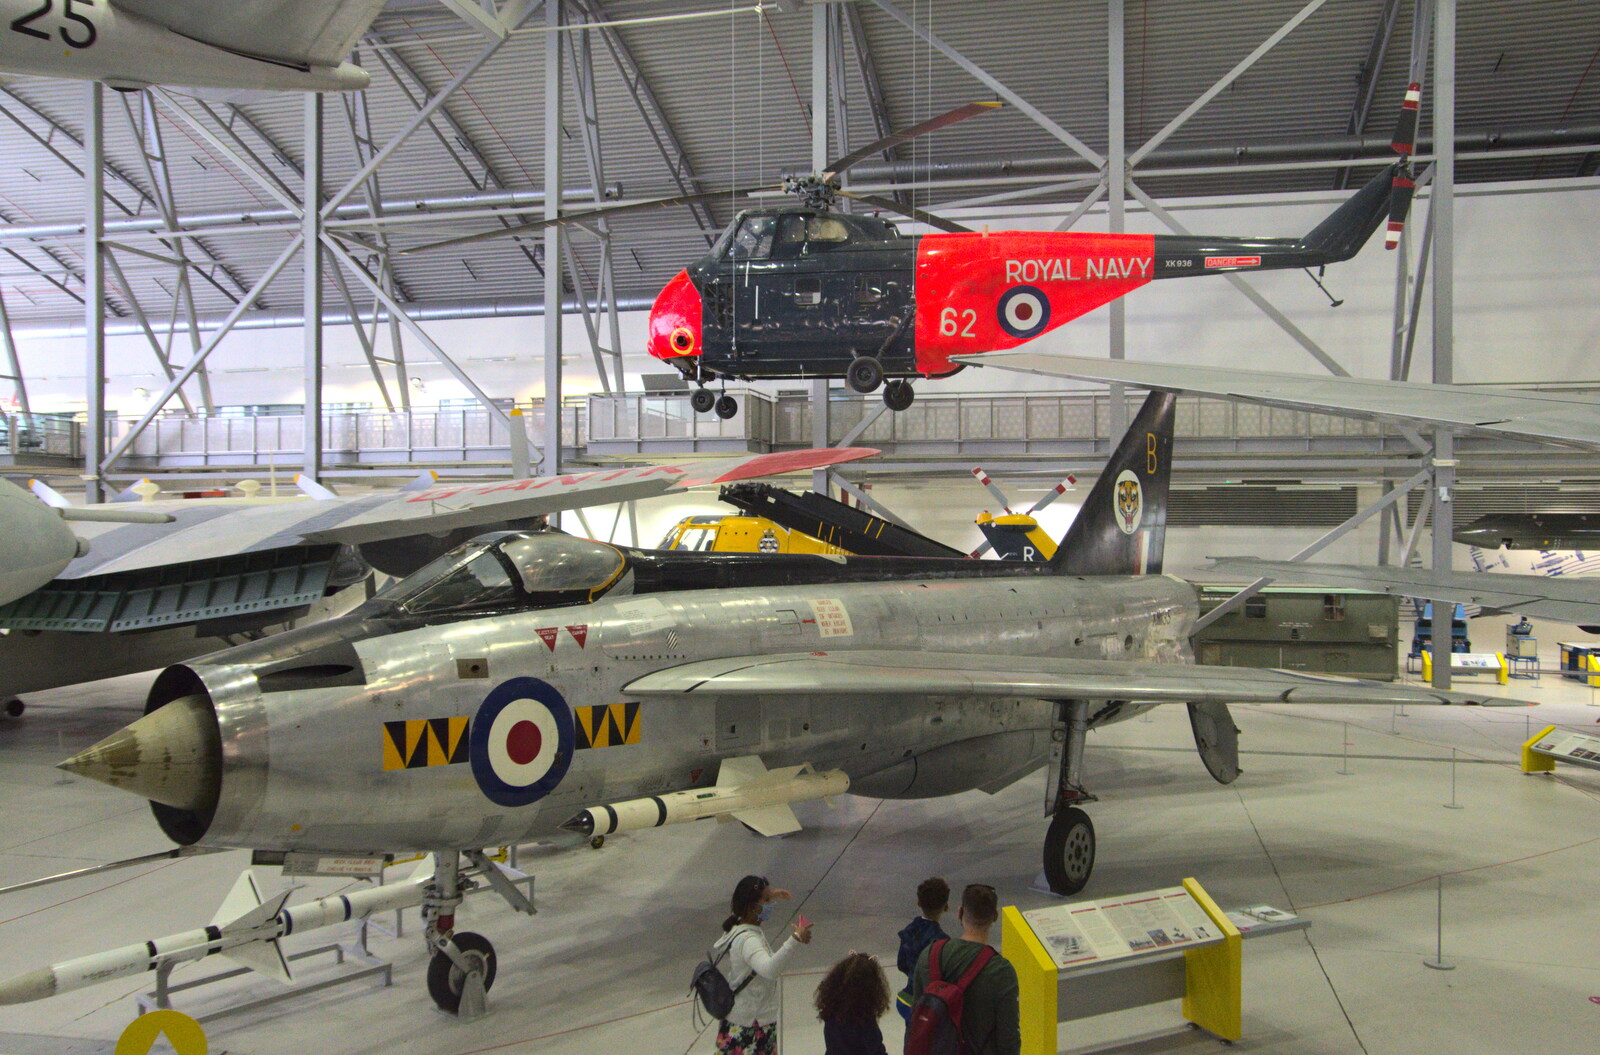 A Lightning and a Westland helicopter from The Duxford Dash, IWM Duxford, Cambridge - 13th September 2020